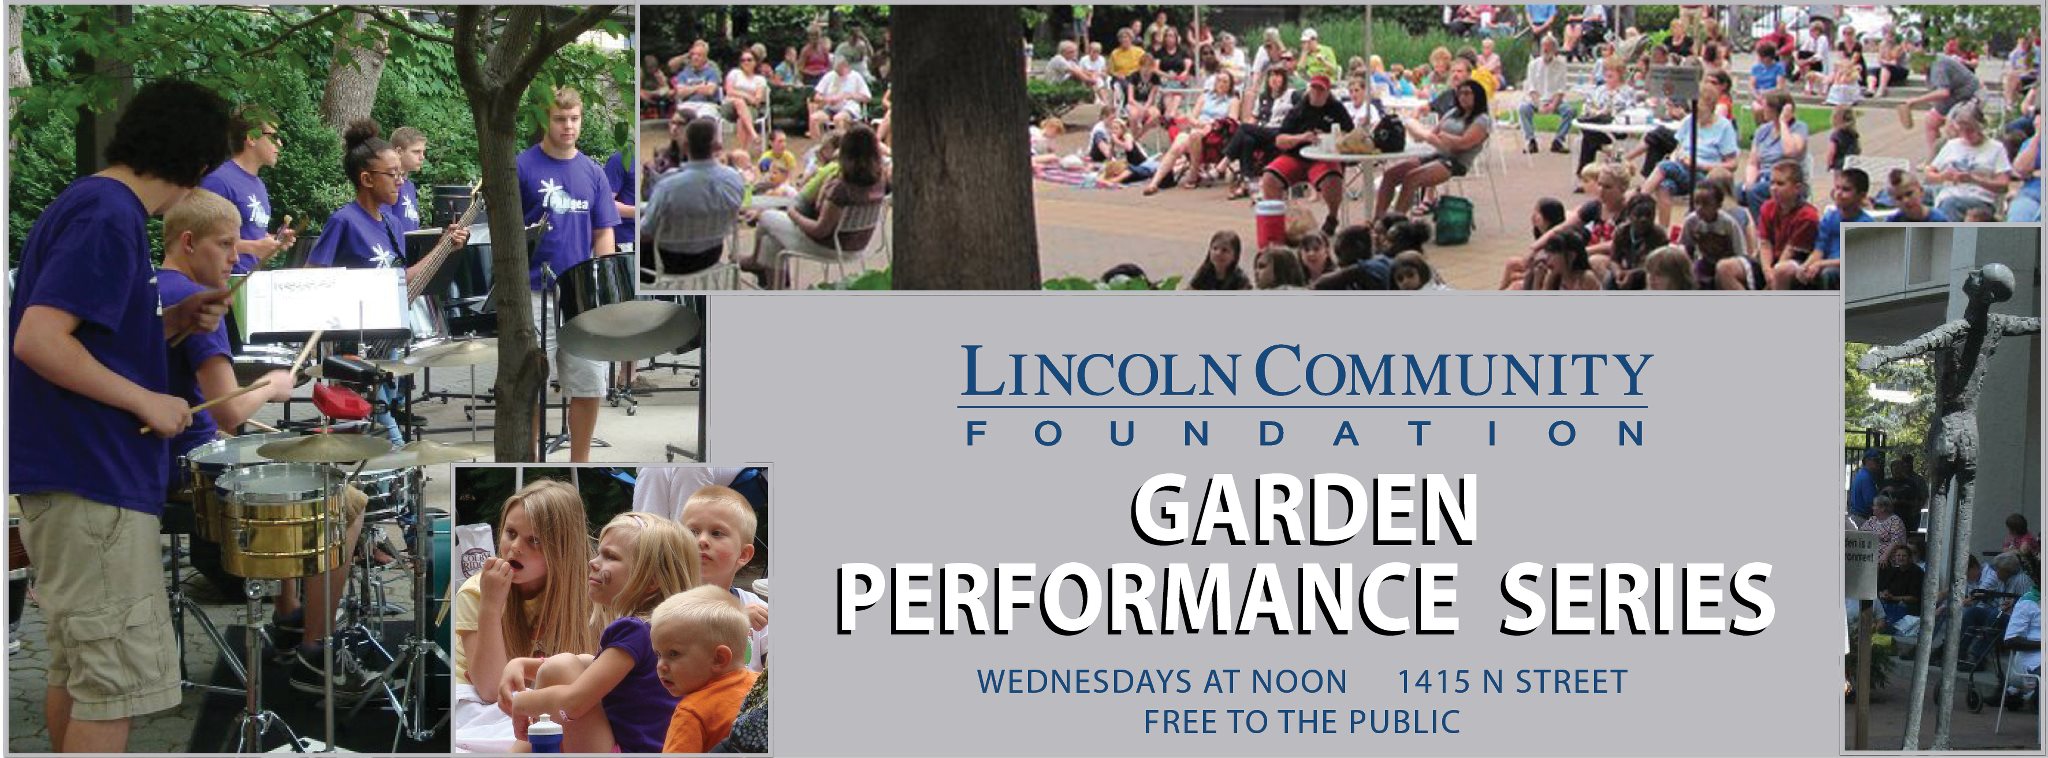 Downtown Lincoln Events